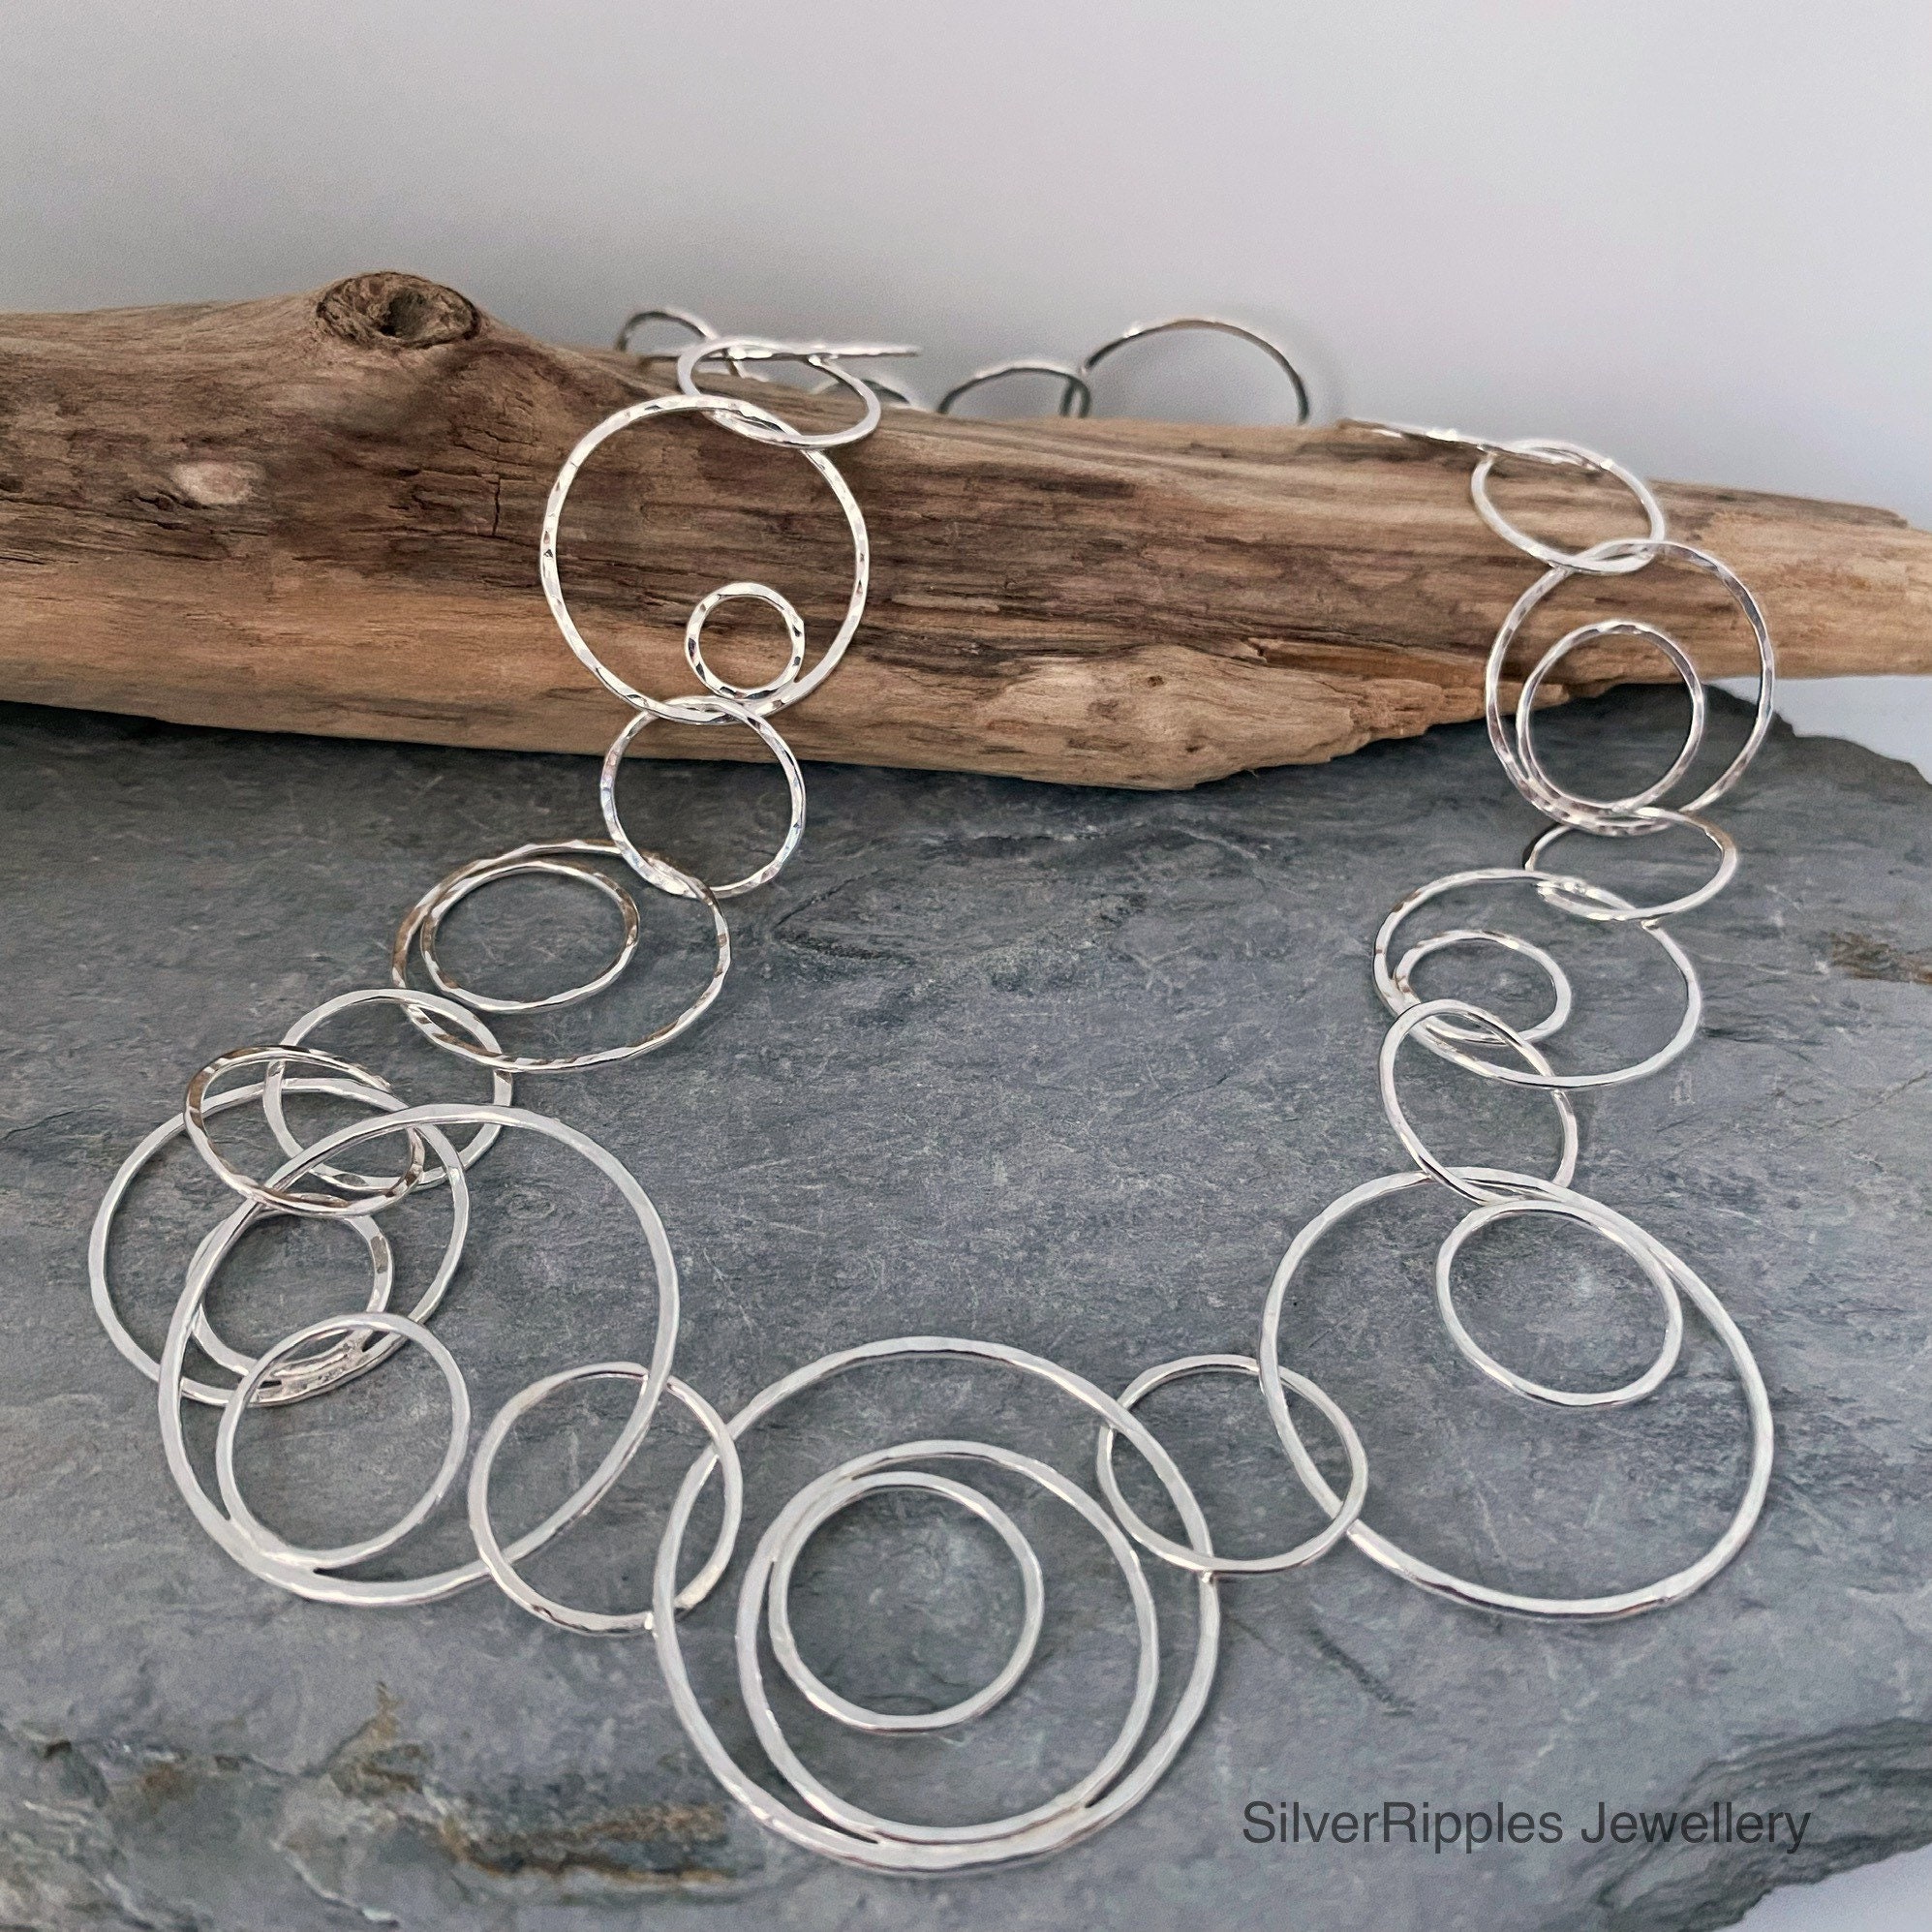 Hammered Silver Chain Necklace With Round Links, Eccentric Circles Inside, Unique Handmade Necklace